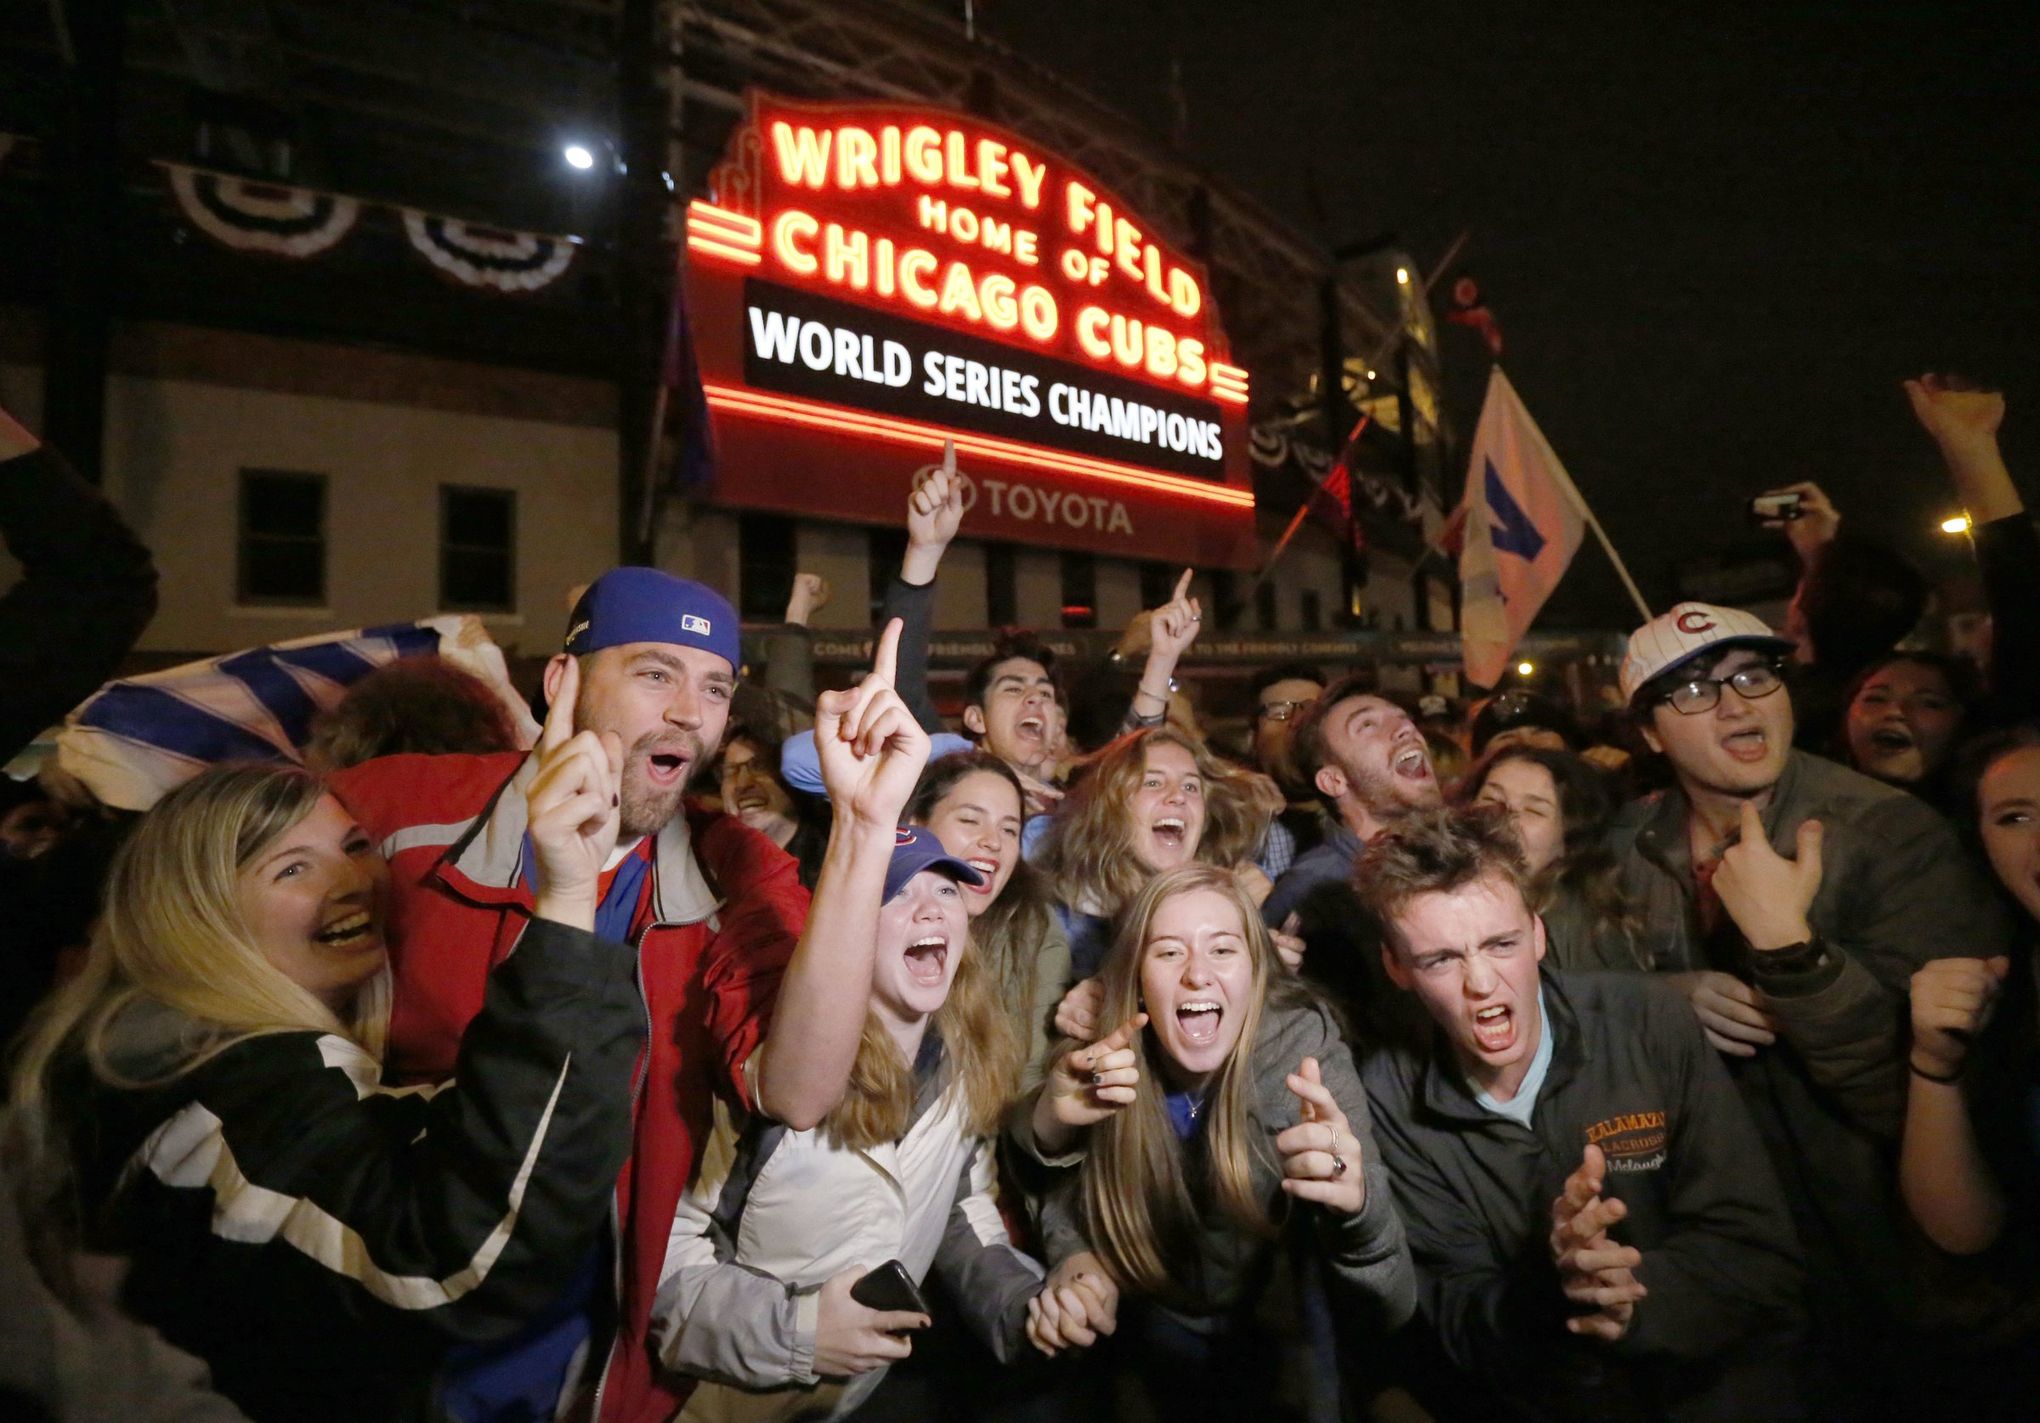 Cubs win 1st World Series title since 1908, beat Indians in Game 7